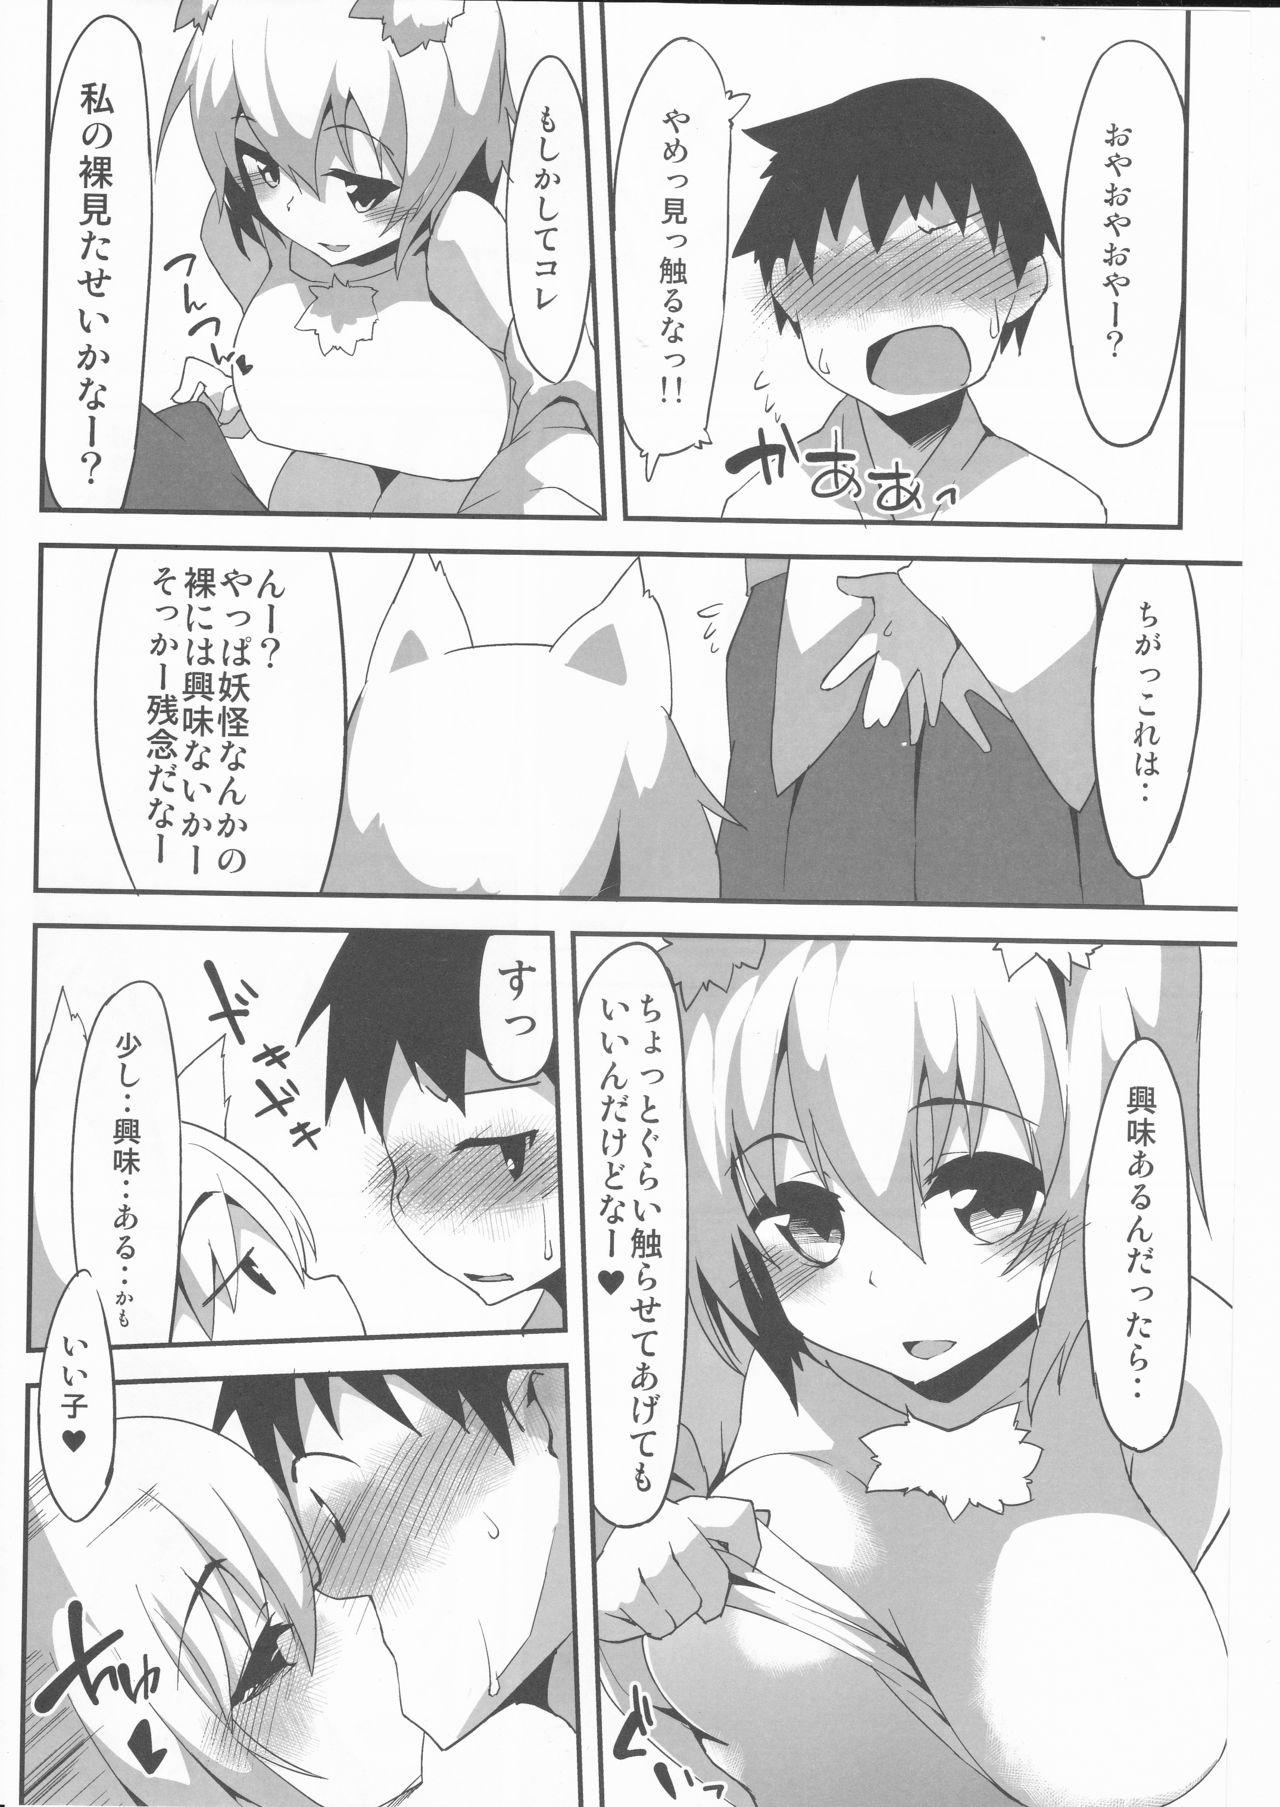 Oral Sex Ecchi de Wanko na Onee-chan - Touhou project Leaked - Page 6